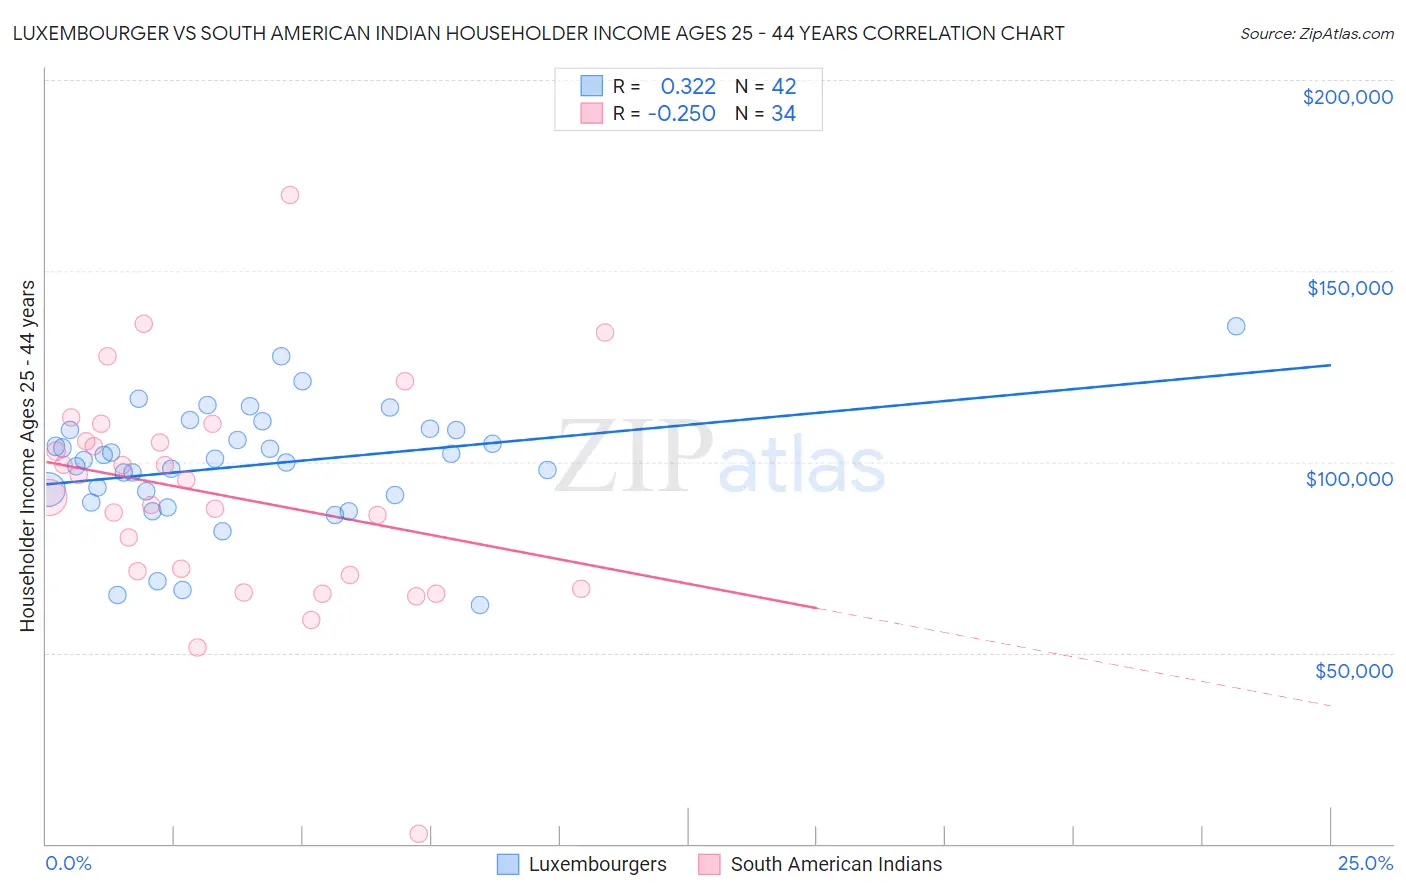 Luxembourger vs South American Indian Householder Income Ages 25 - 44 years